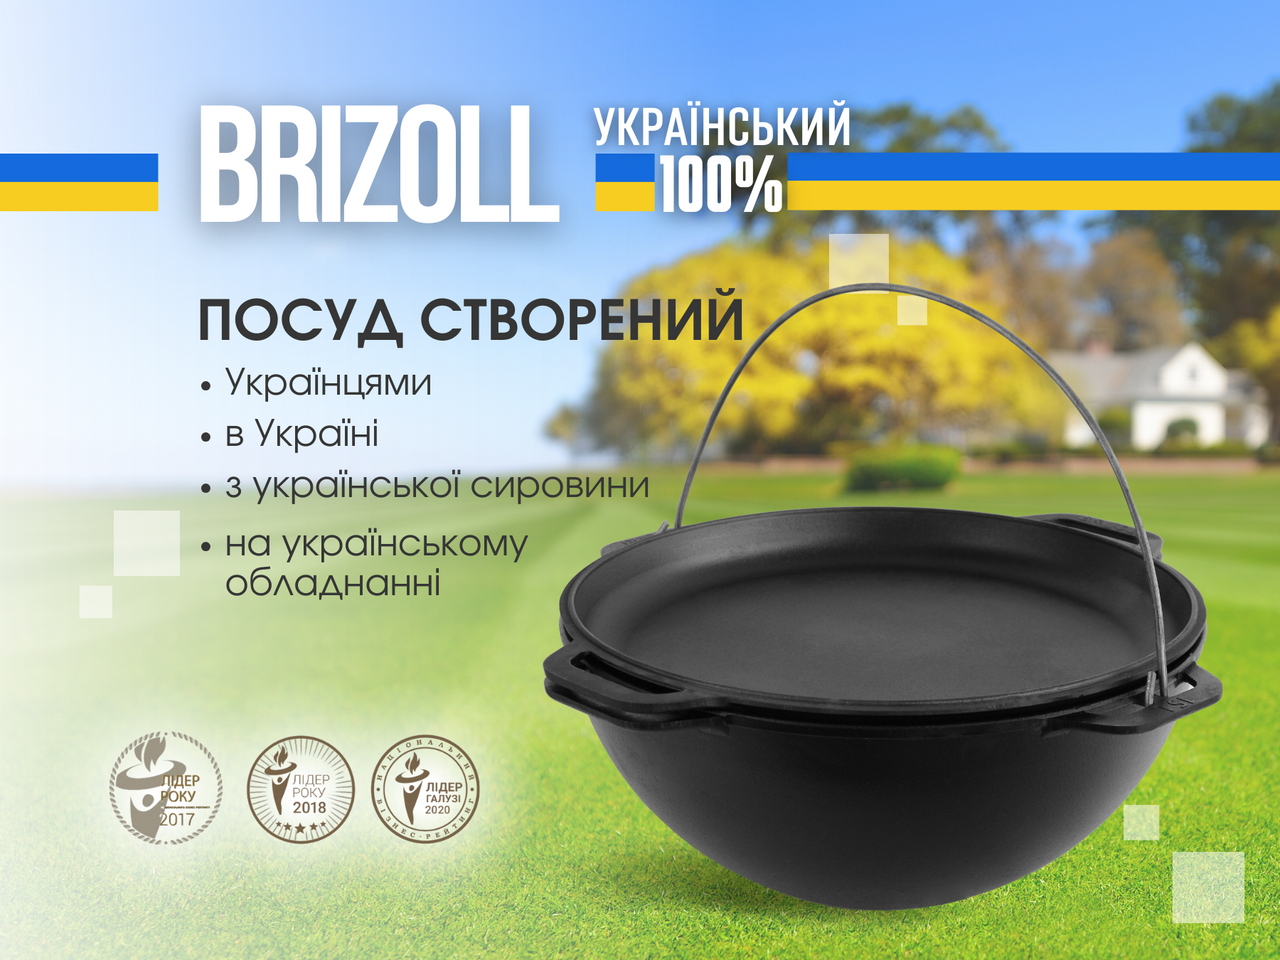 Cast iron asian cauldron 15 L WITH A LID-FRYING PAN. a bag and a tripod